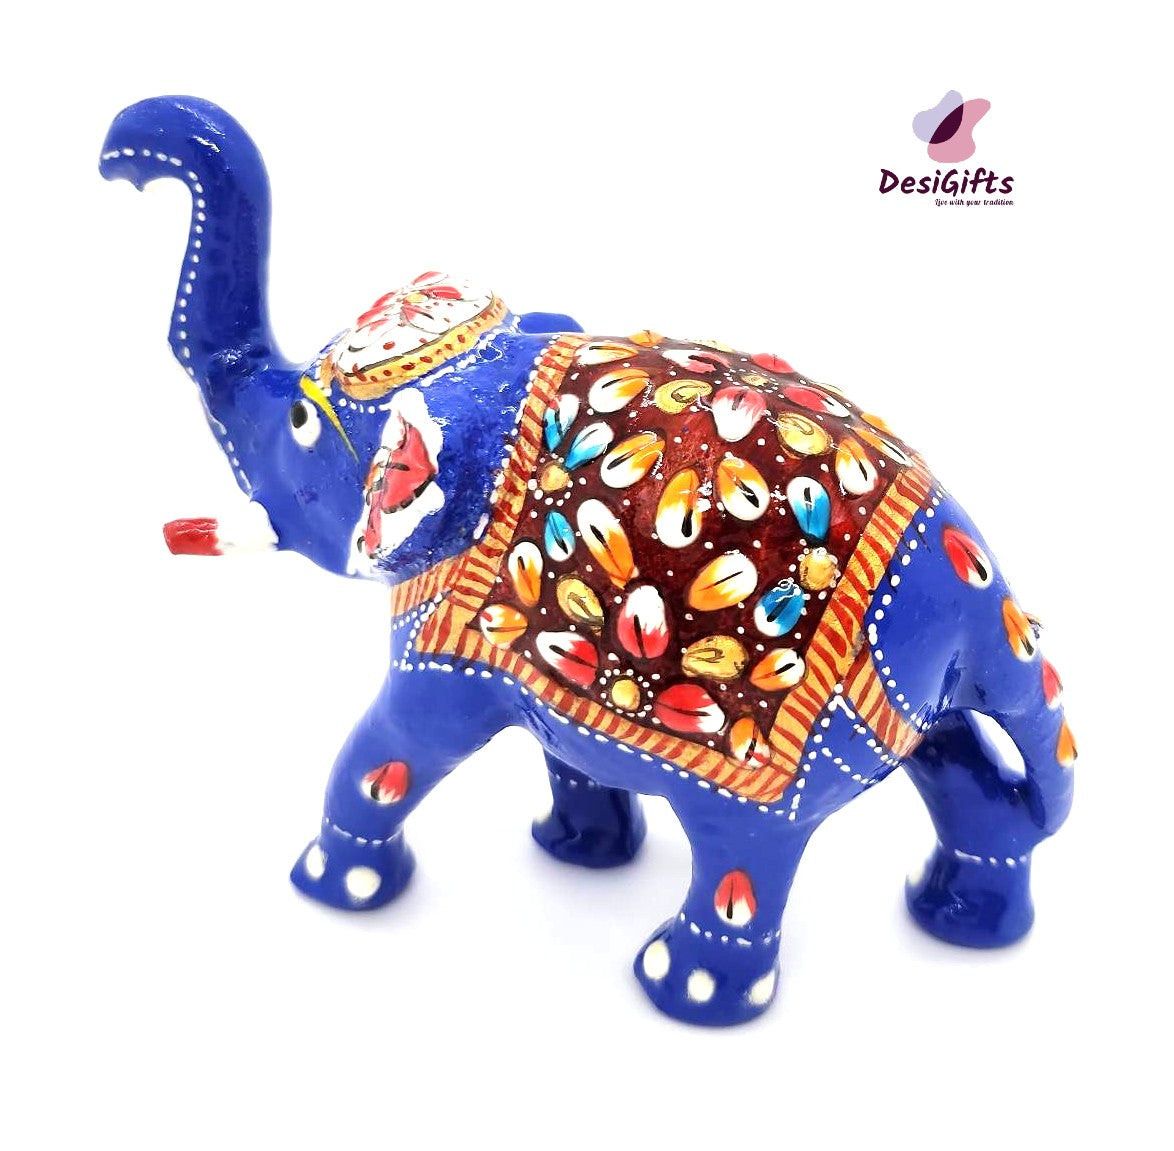 4" Handcrafted Painted Elephant Statue, ELC#944